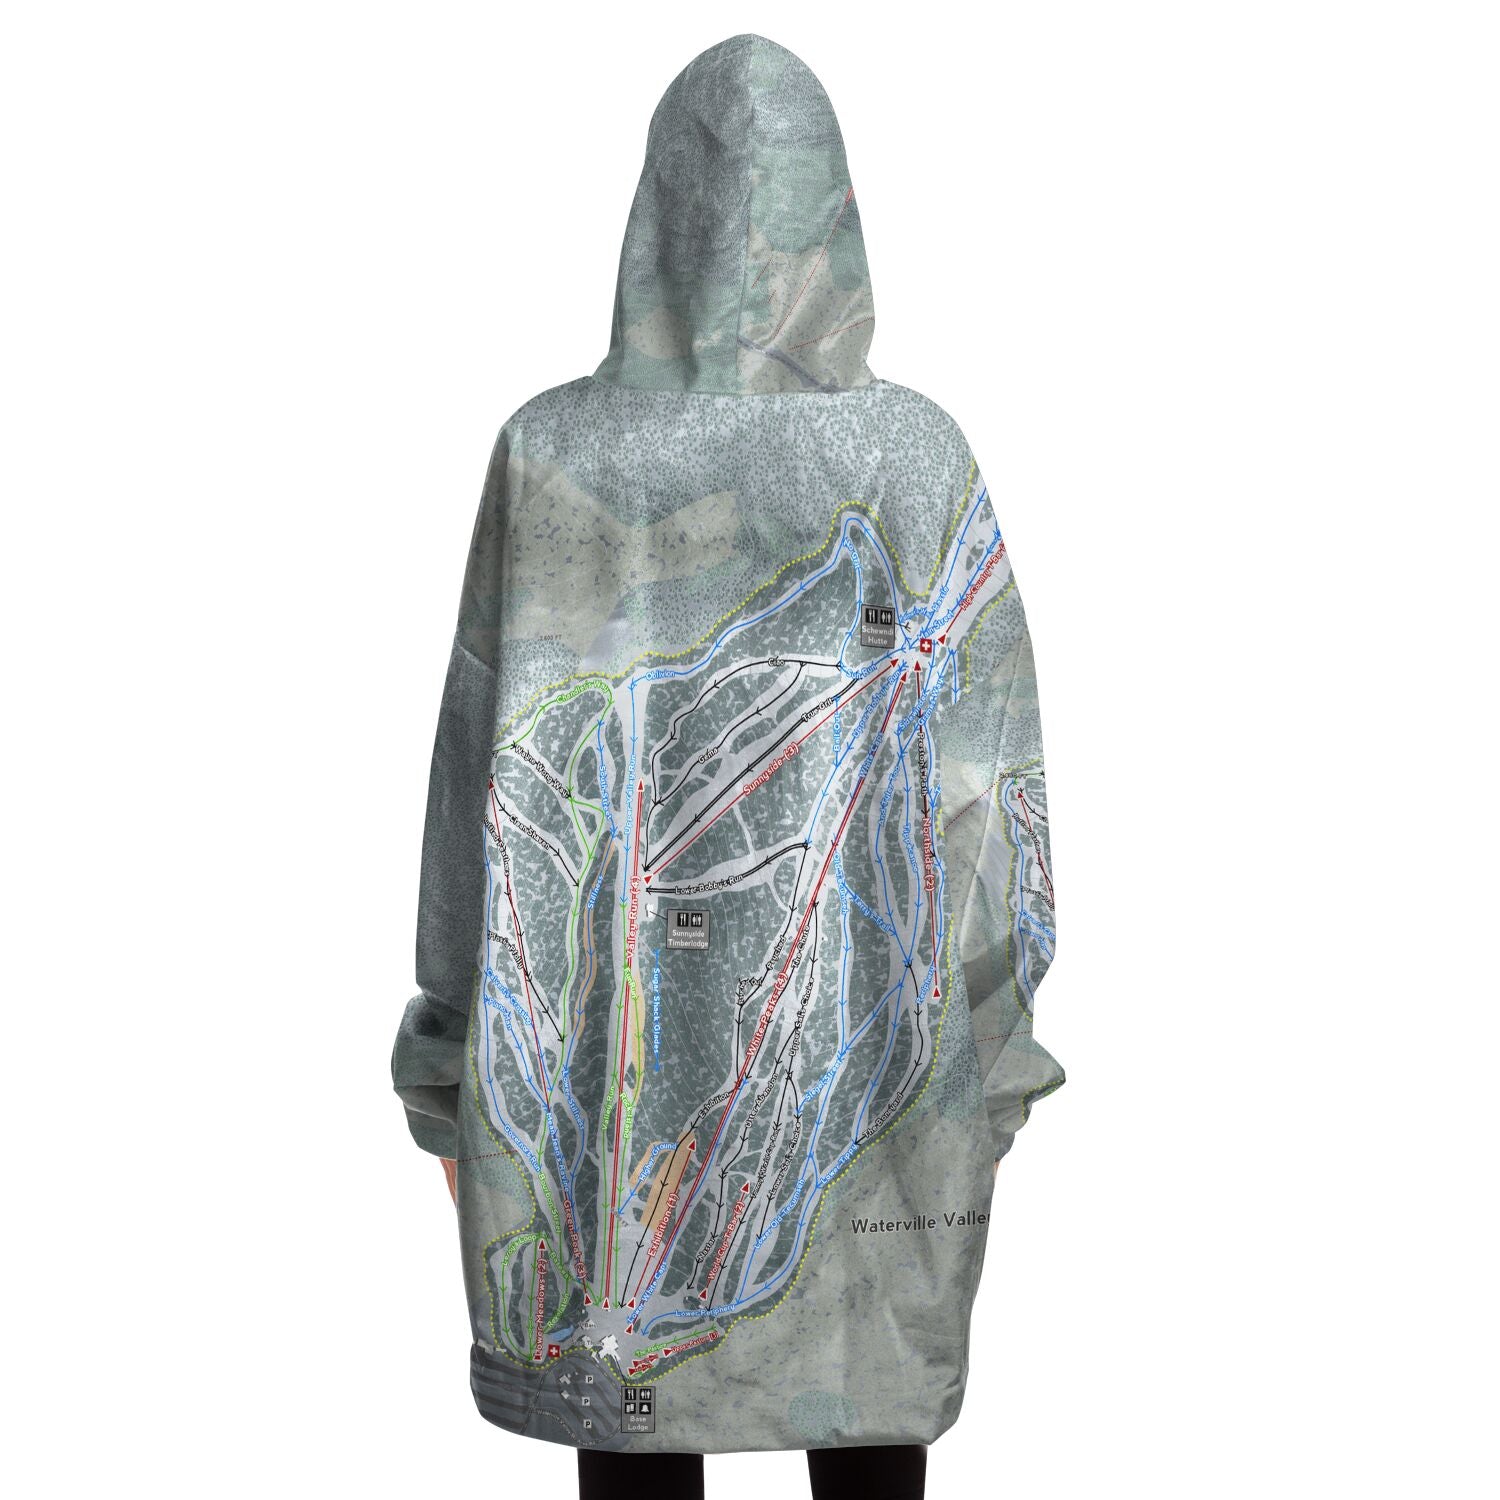 Waterville Valley, New Hampshire Ski Trail Map - Snug Hoodie